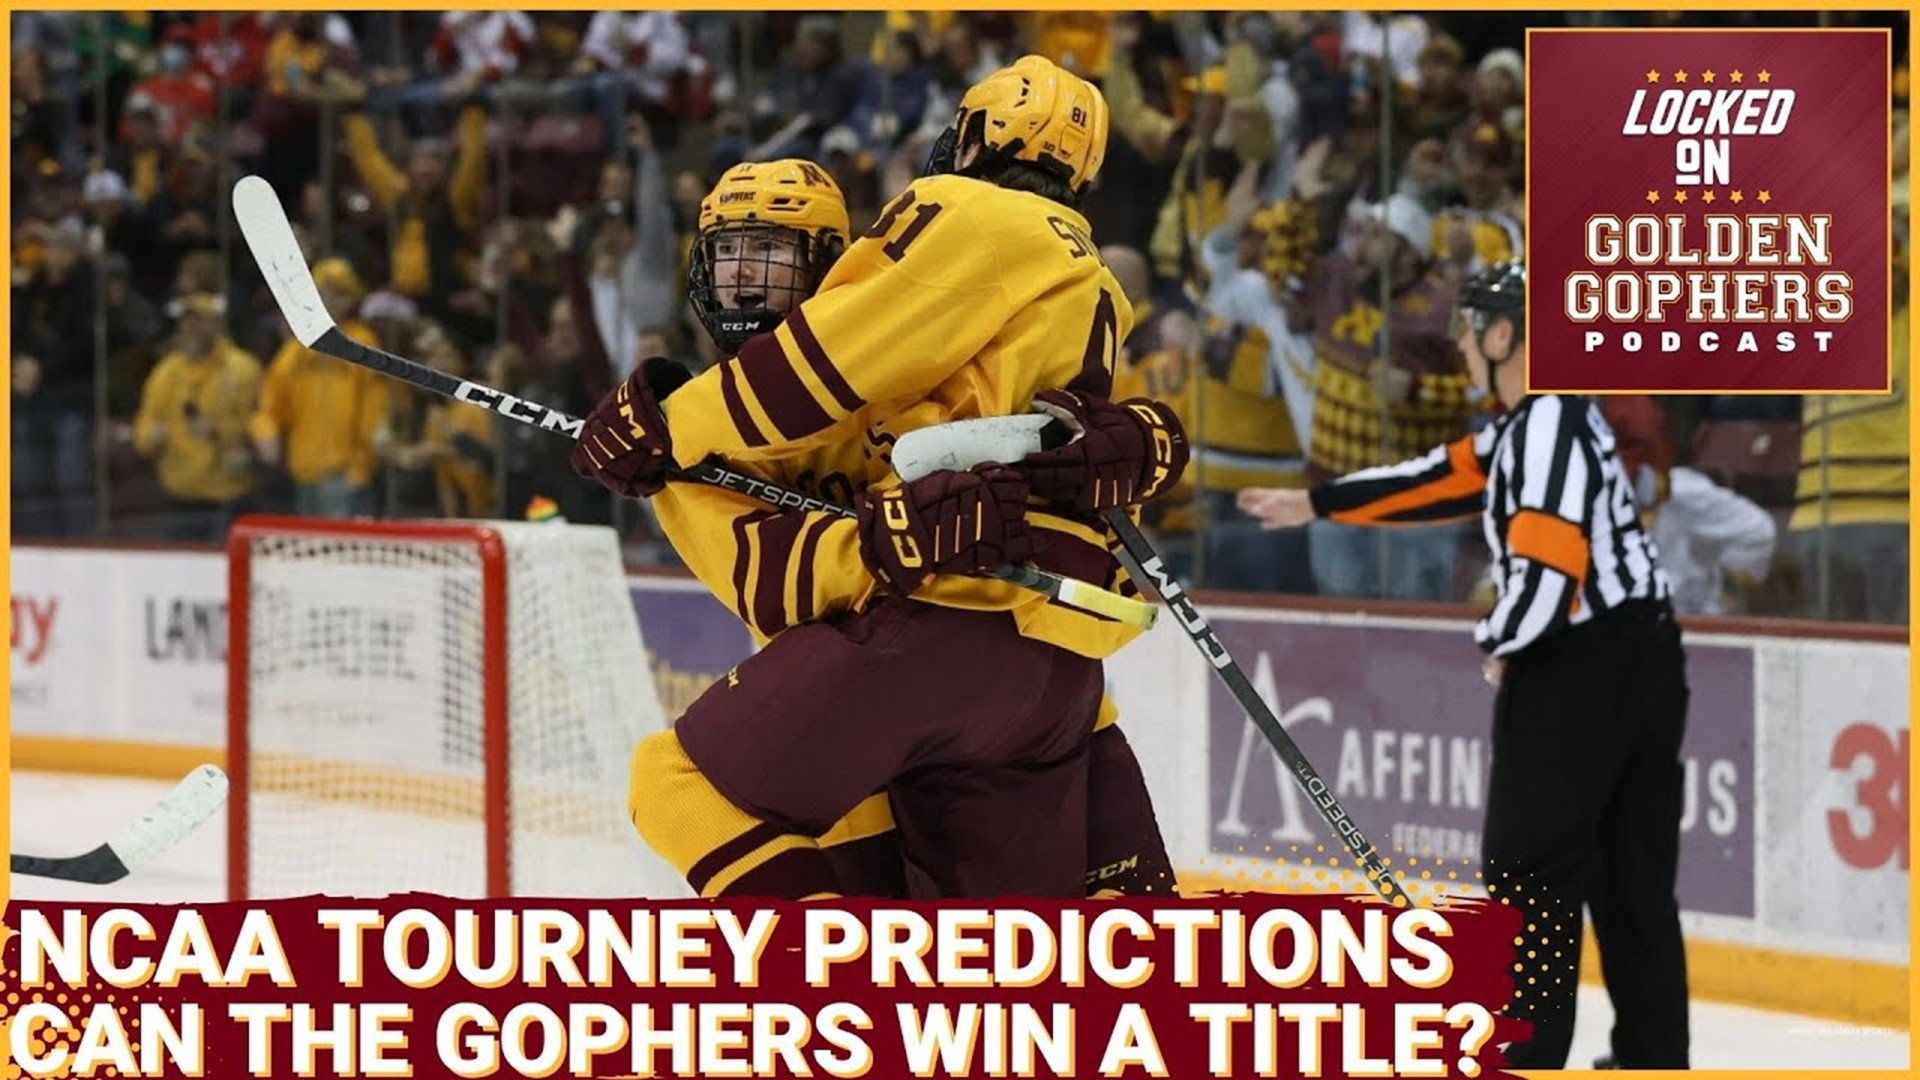 Today we discuss the loss in the Big Ten Championship game for the Minnesota Gophers and then we dive in deep with thoughts on the Fargo regional